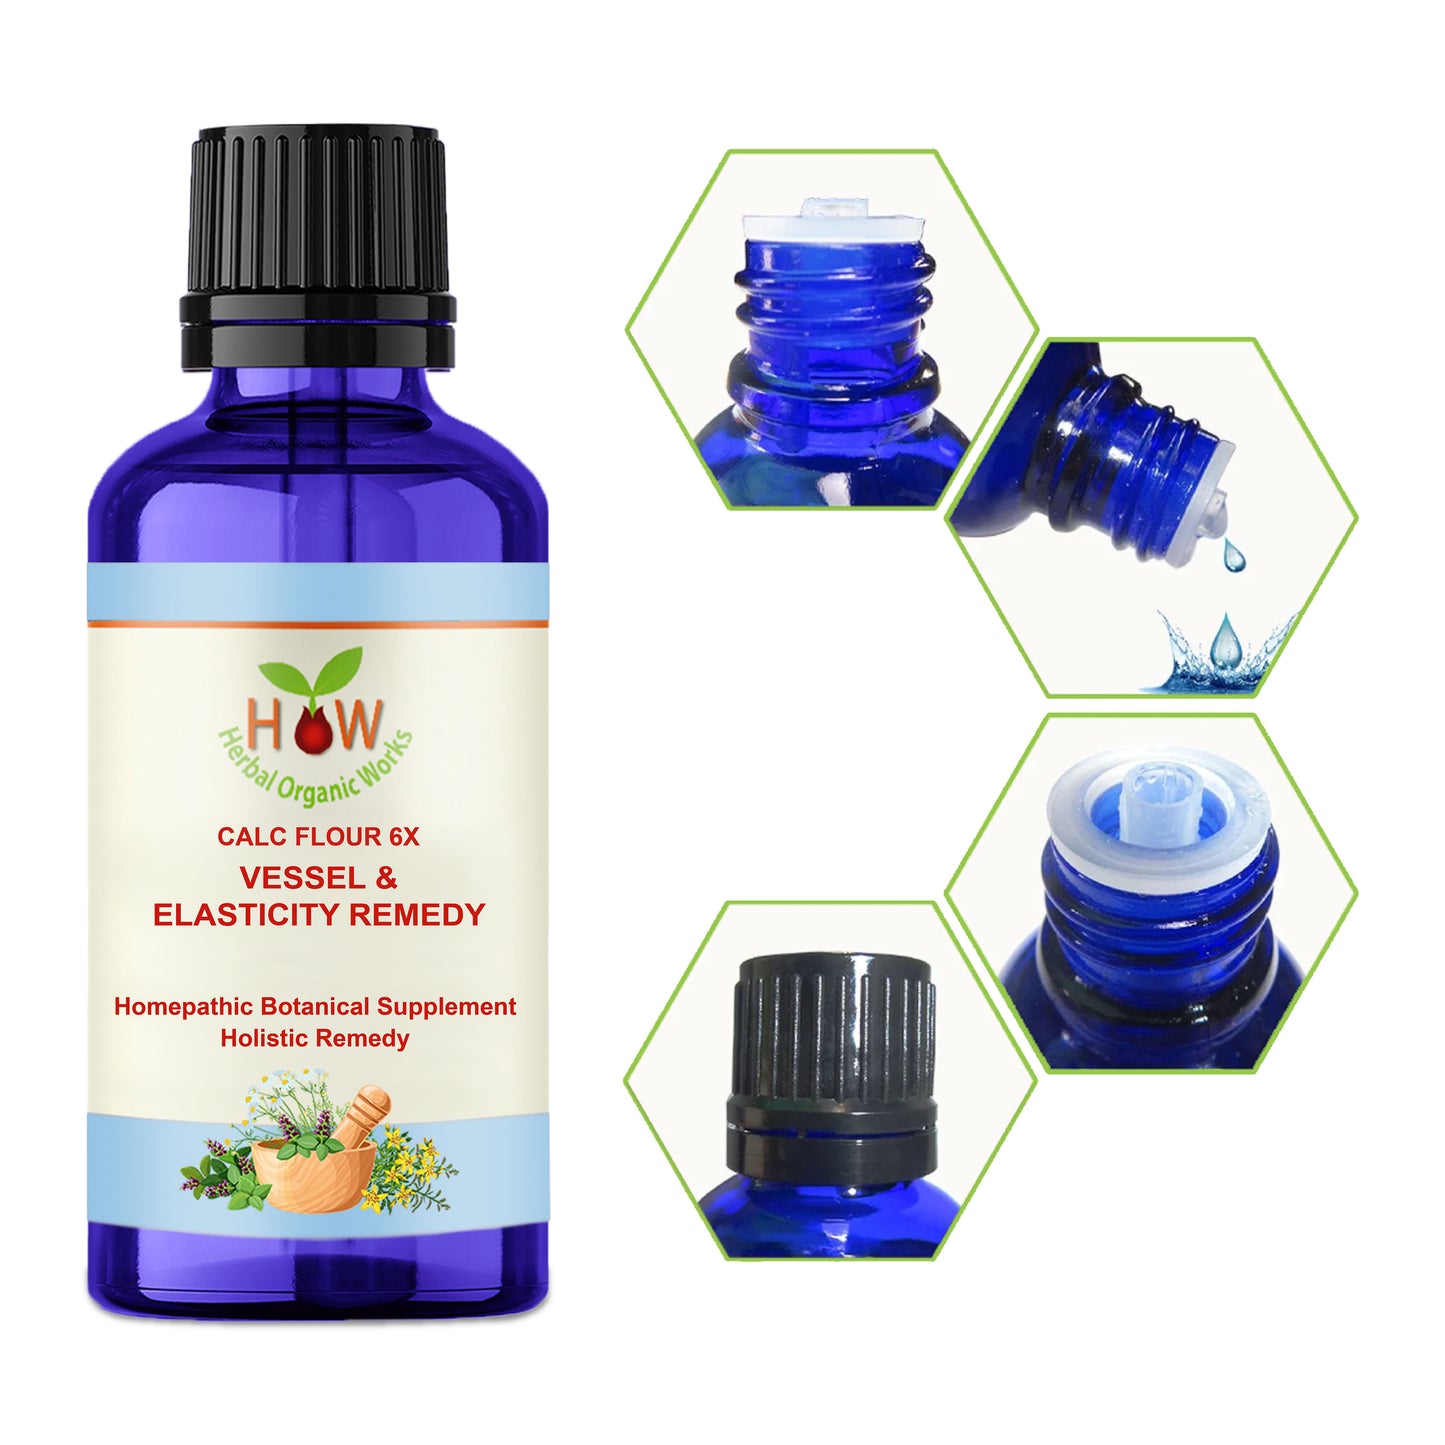 VESSELS AND ELASTICITY REMEDY